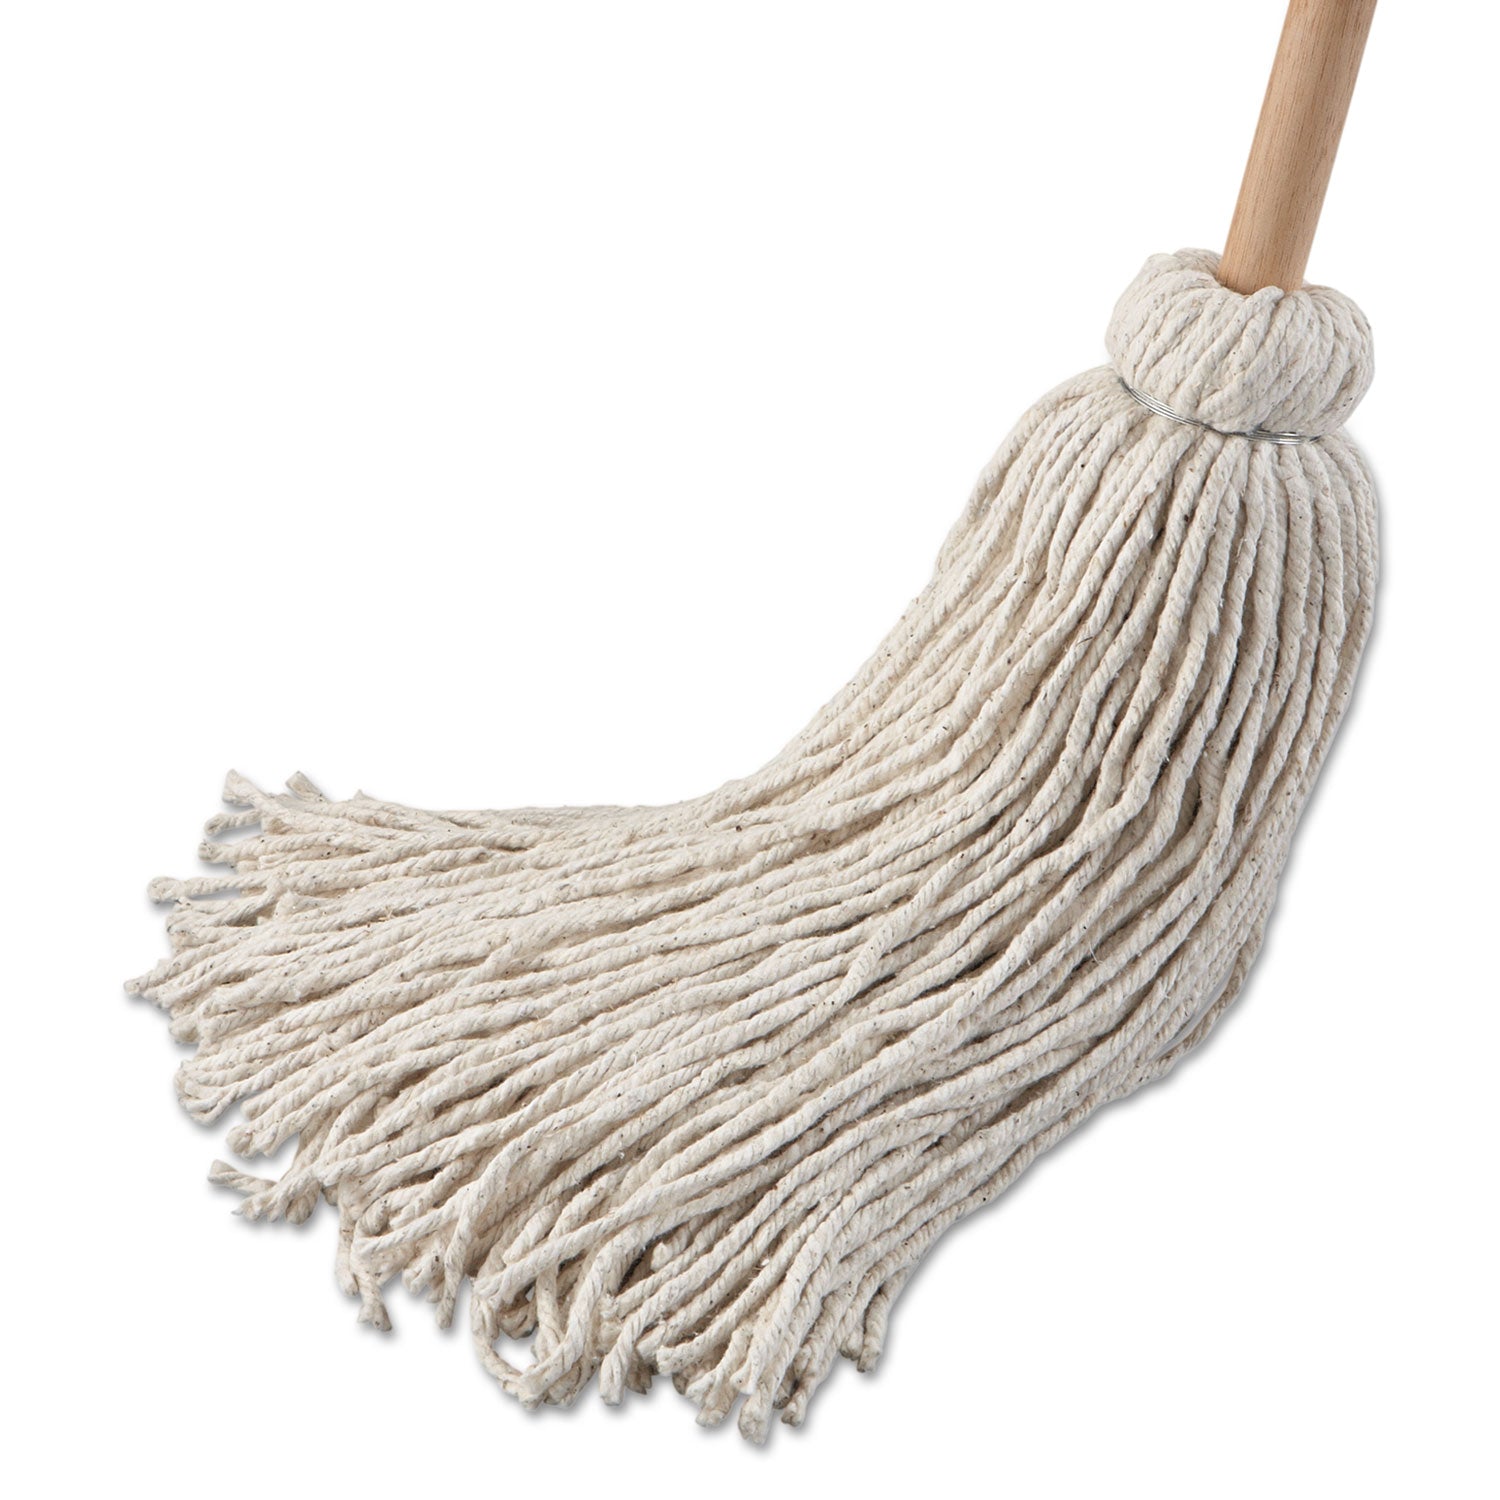 Handle/Deck Mop, #32 White Cotton Head, 54" Natural Wood Handle, 6/Pack - 